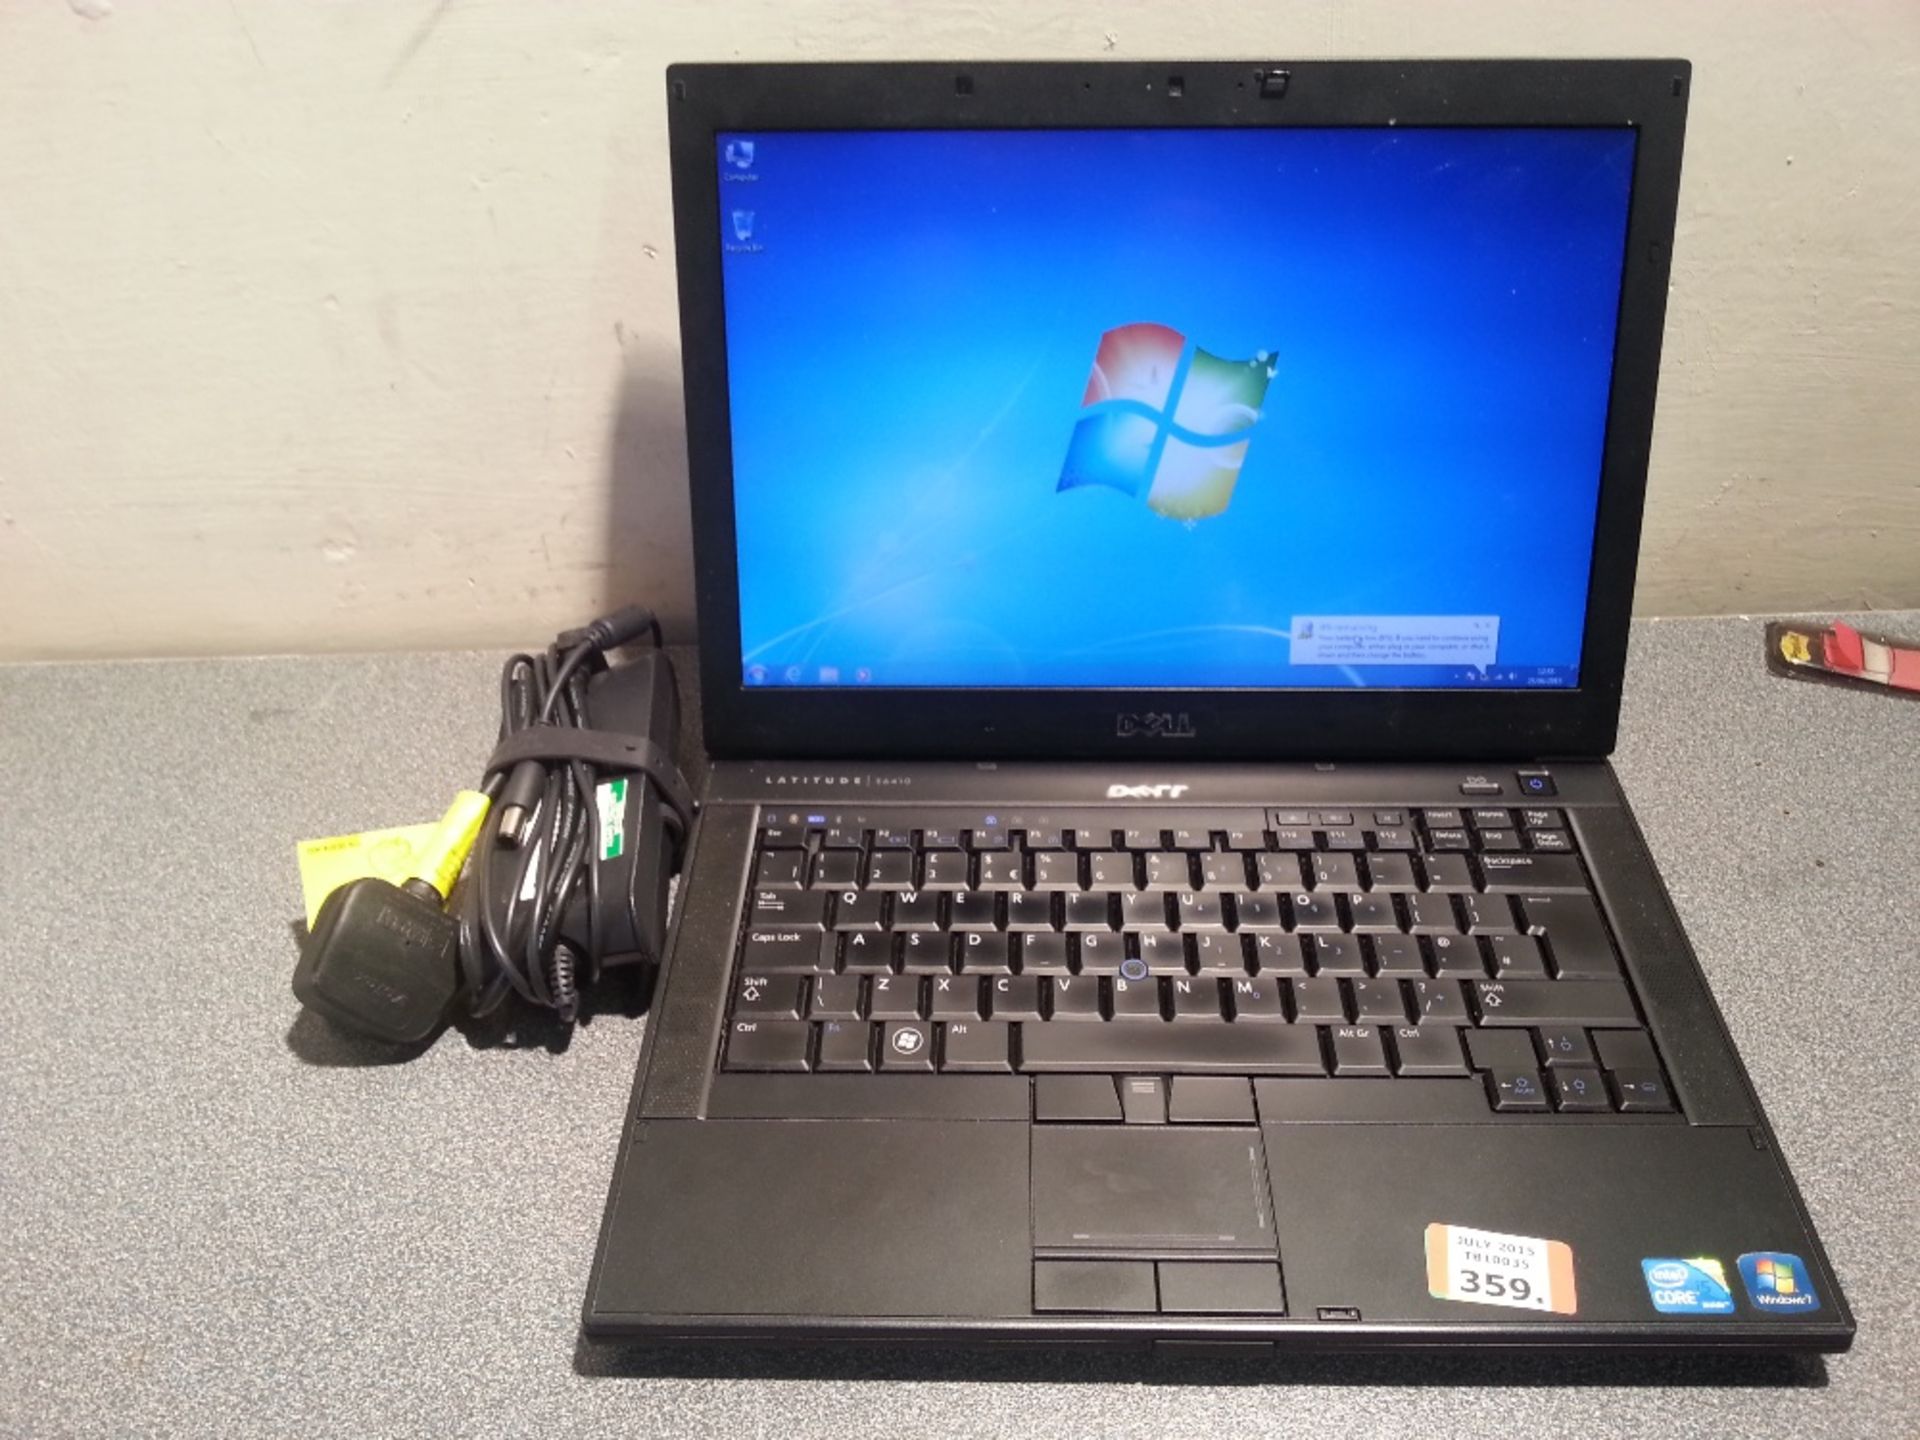 DELL E6410 Laptop - Intel Core i5 @ 2.53Ghz - 4GB Ram - 250GB Hdd - DVD RW - Webcam - Charger -